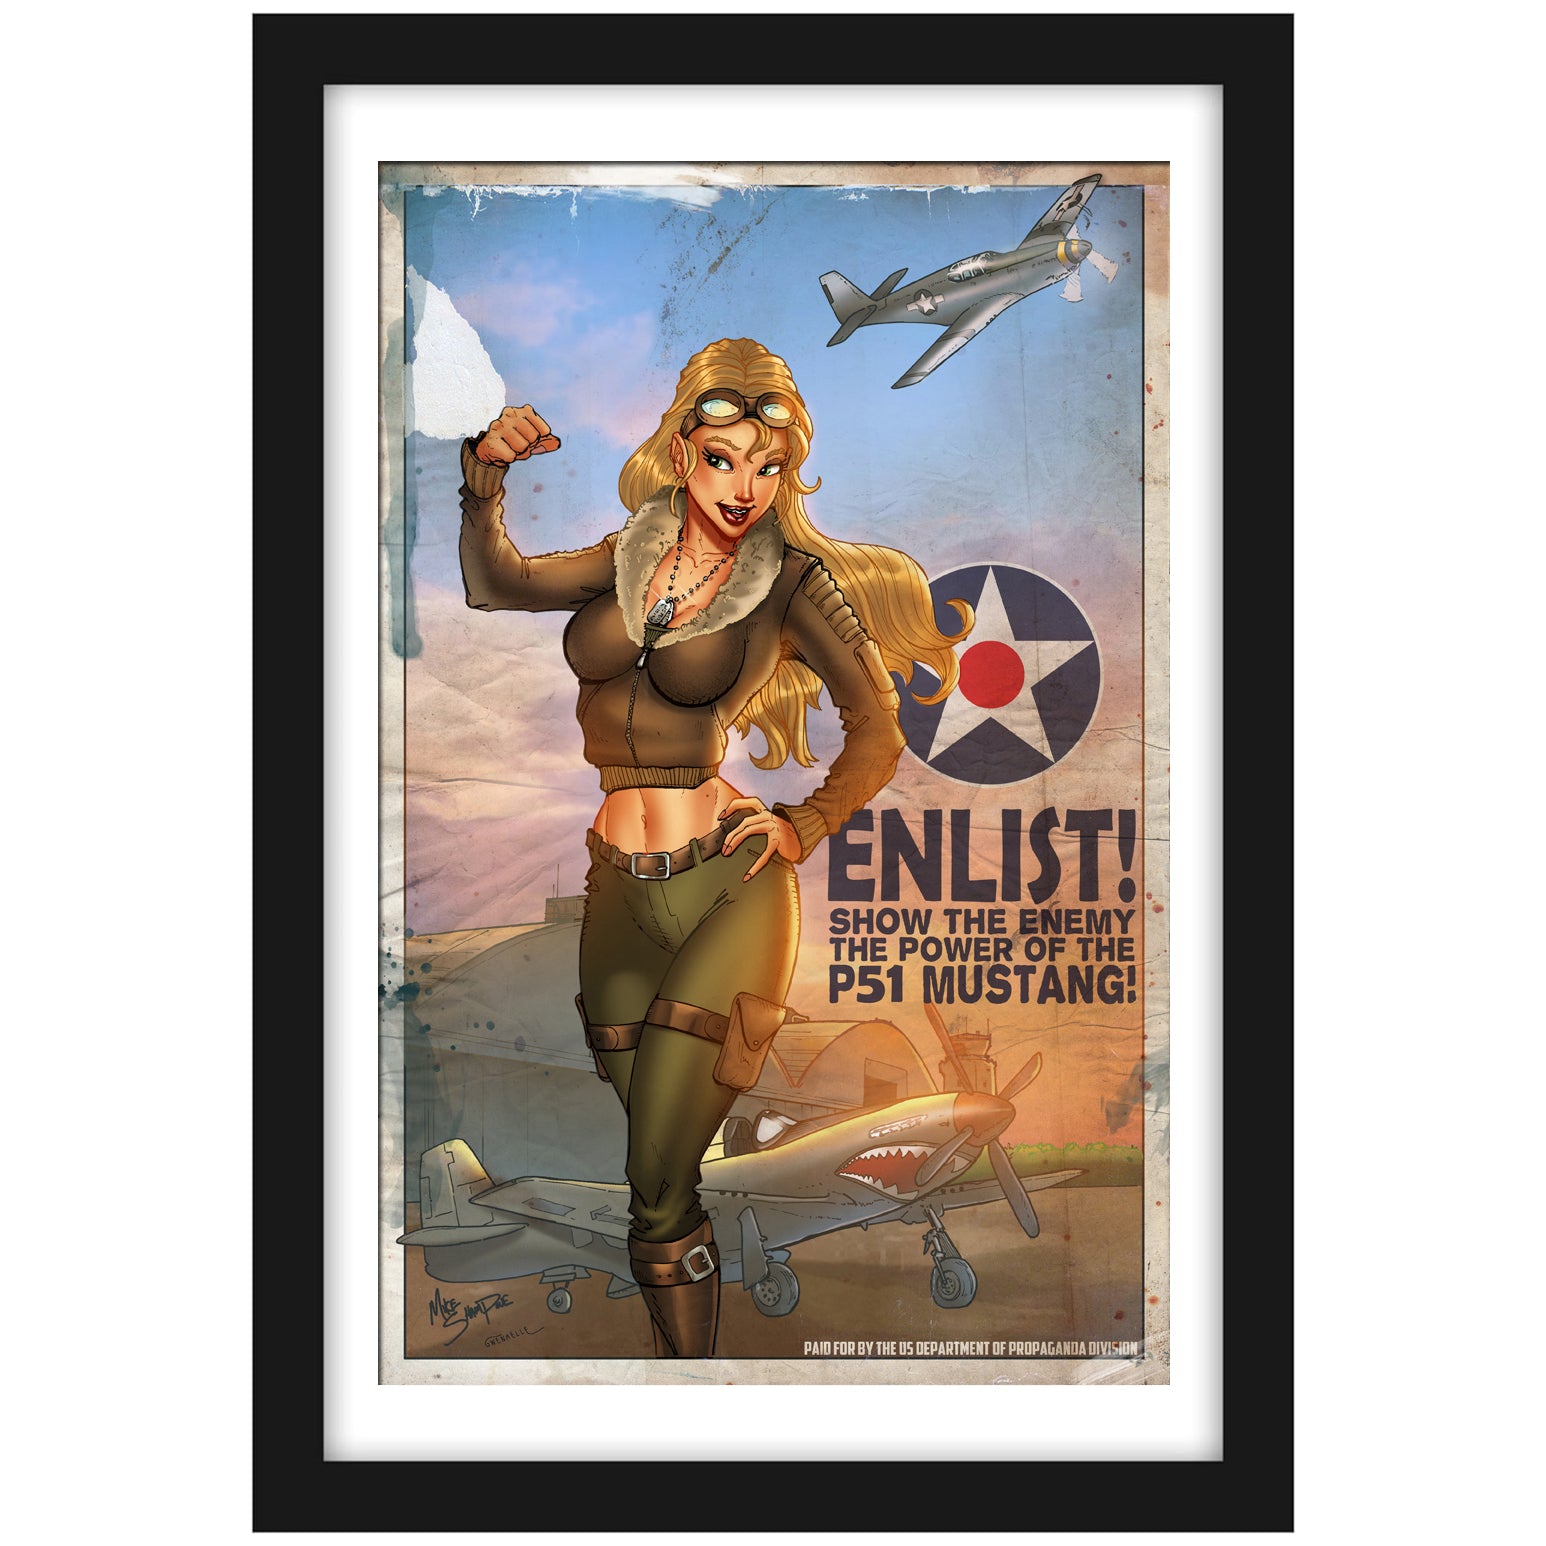 P-51 "Mustang" - Vintage Print Pinup & Airplane Art by Mike Shampine - Signed and Numbered